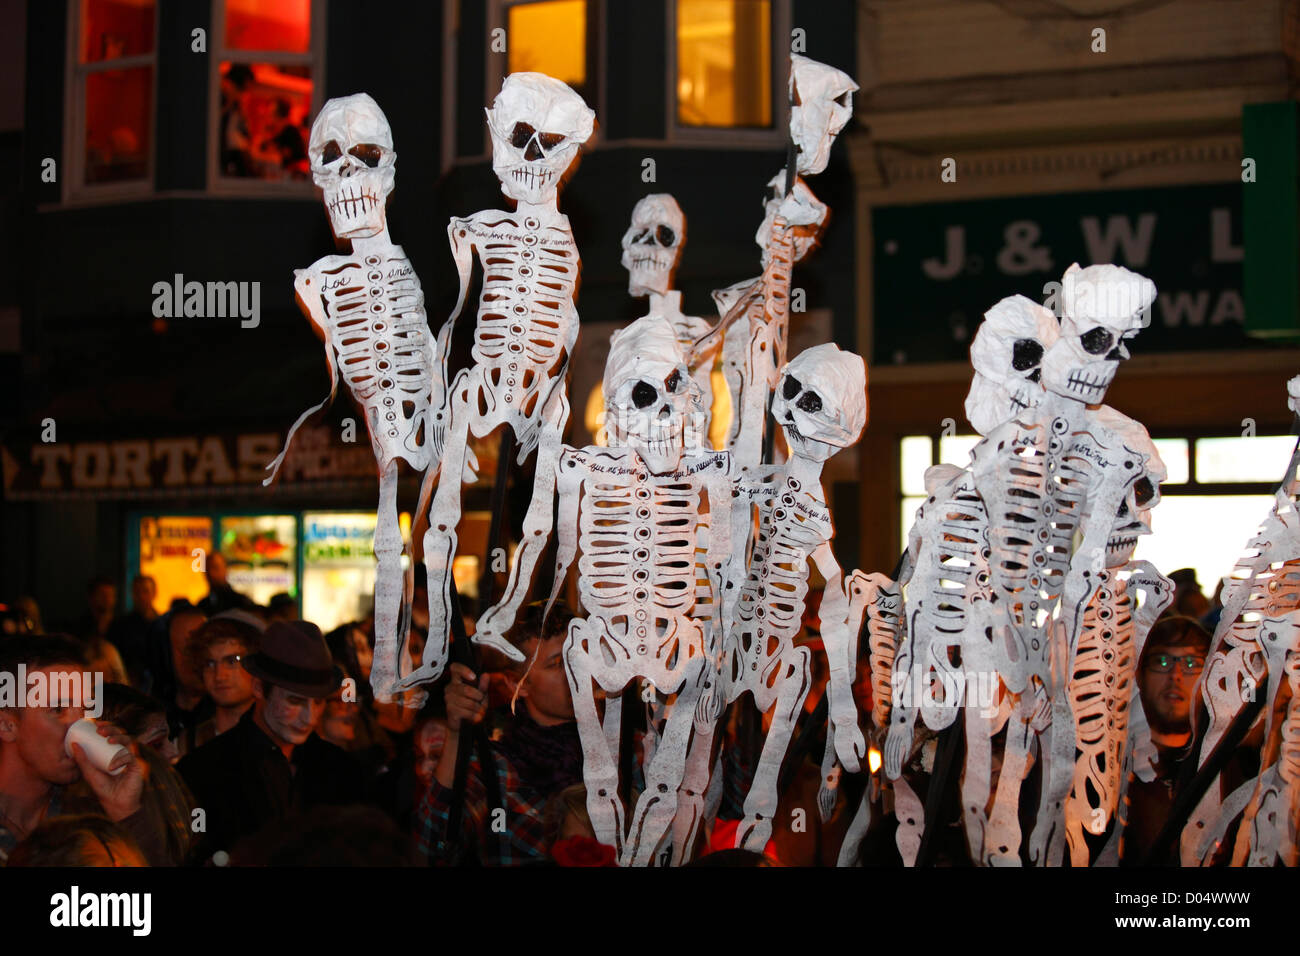 Paper skeletons dancing in the air, Dia de Los Muertos (Day of the dead), Mission District, San Francisco Stock Photo